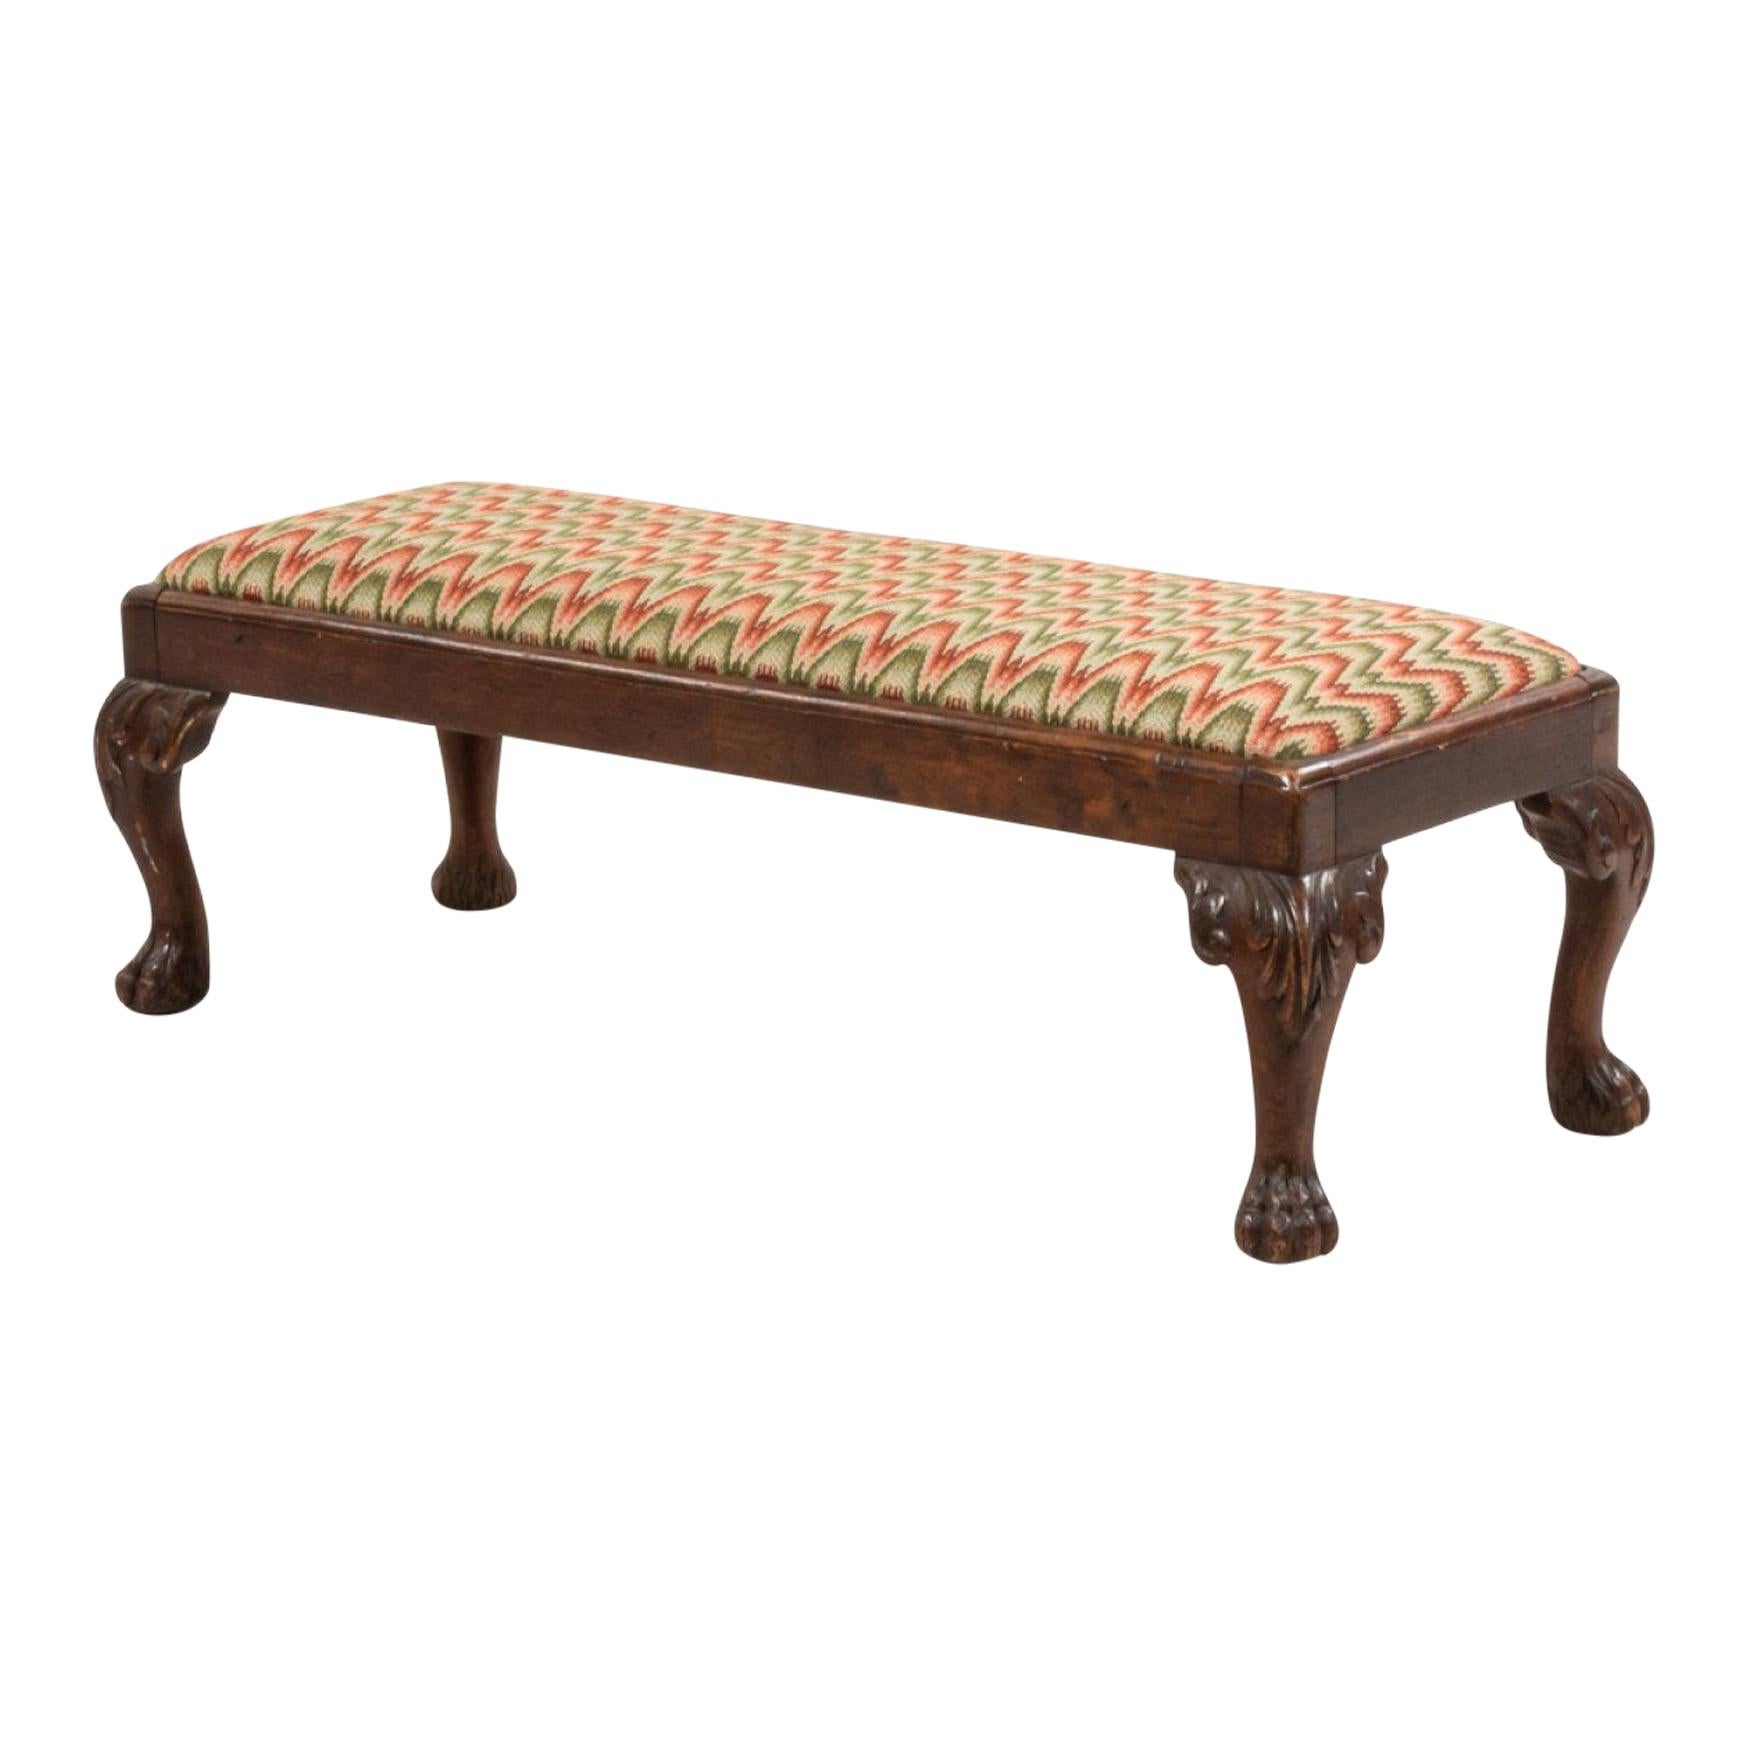 English Georgian Style Low Upholstered Bench